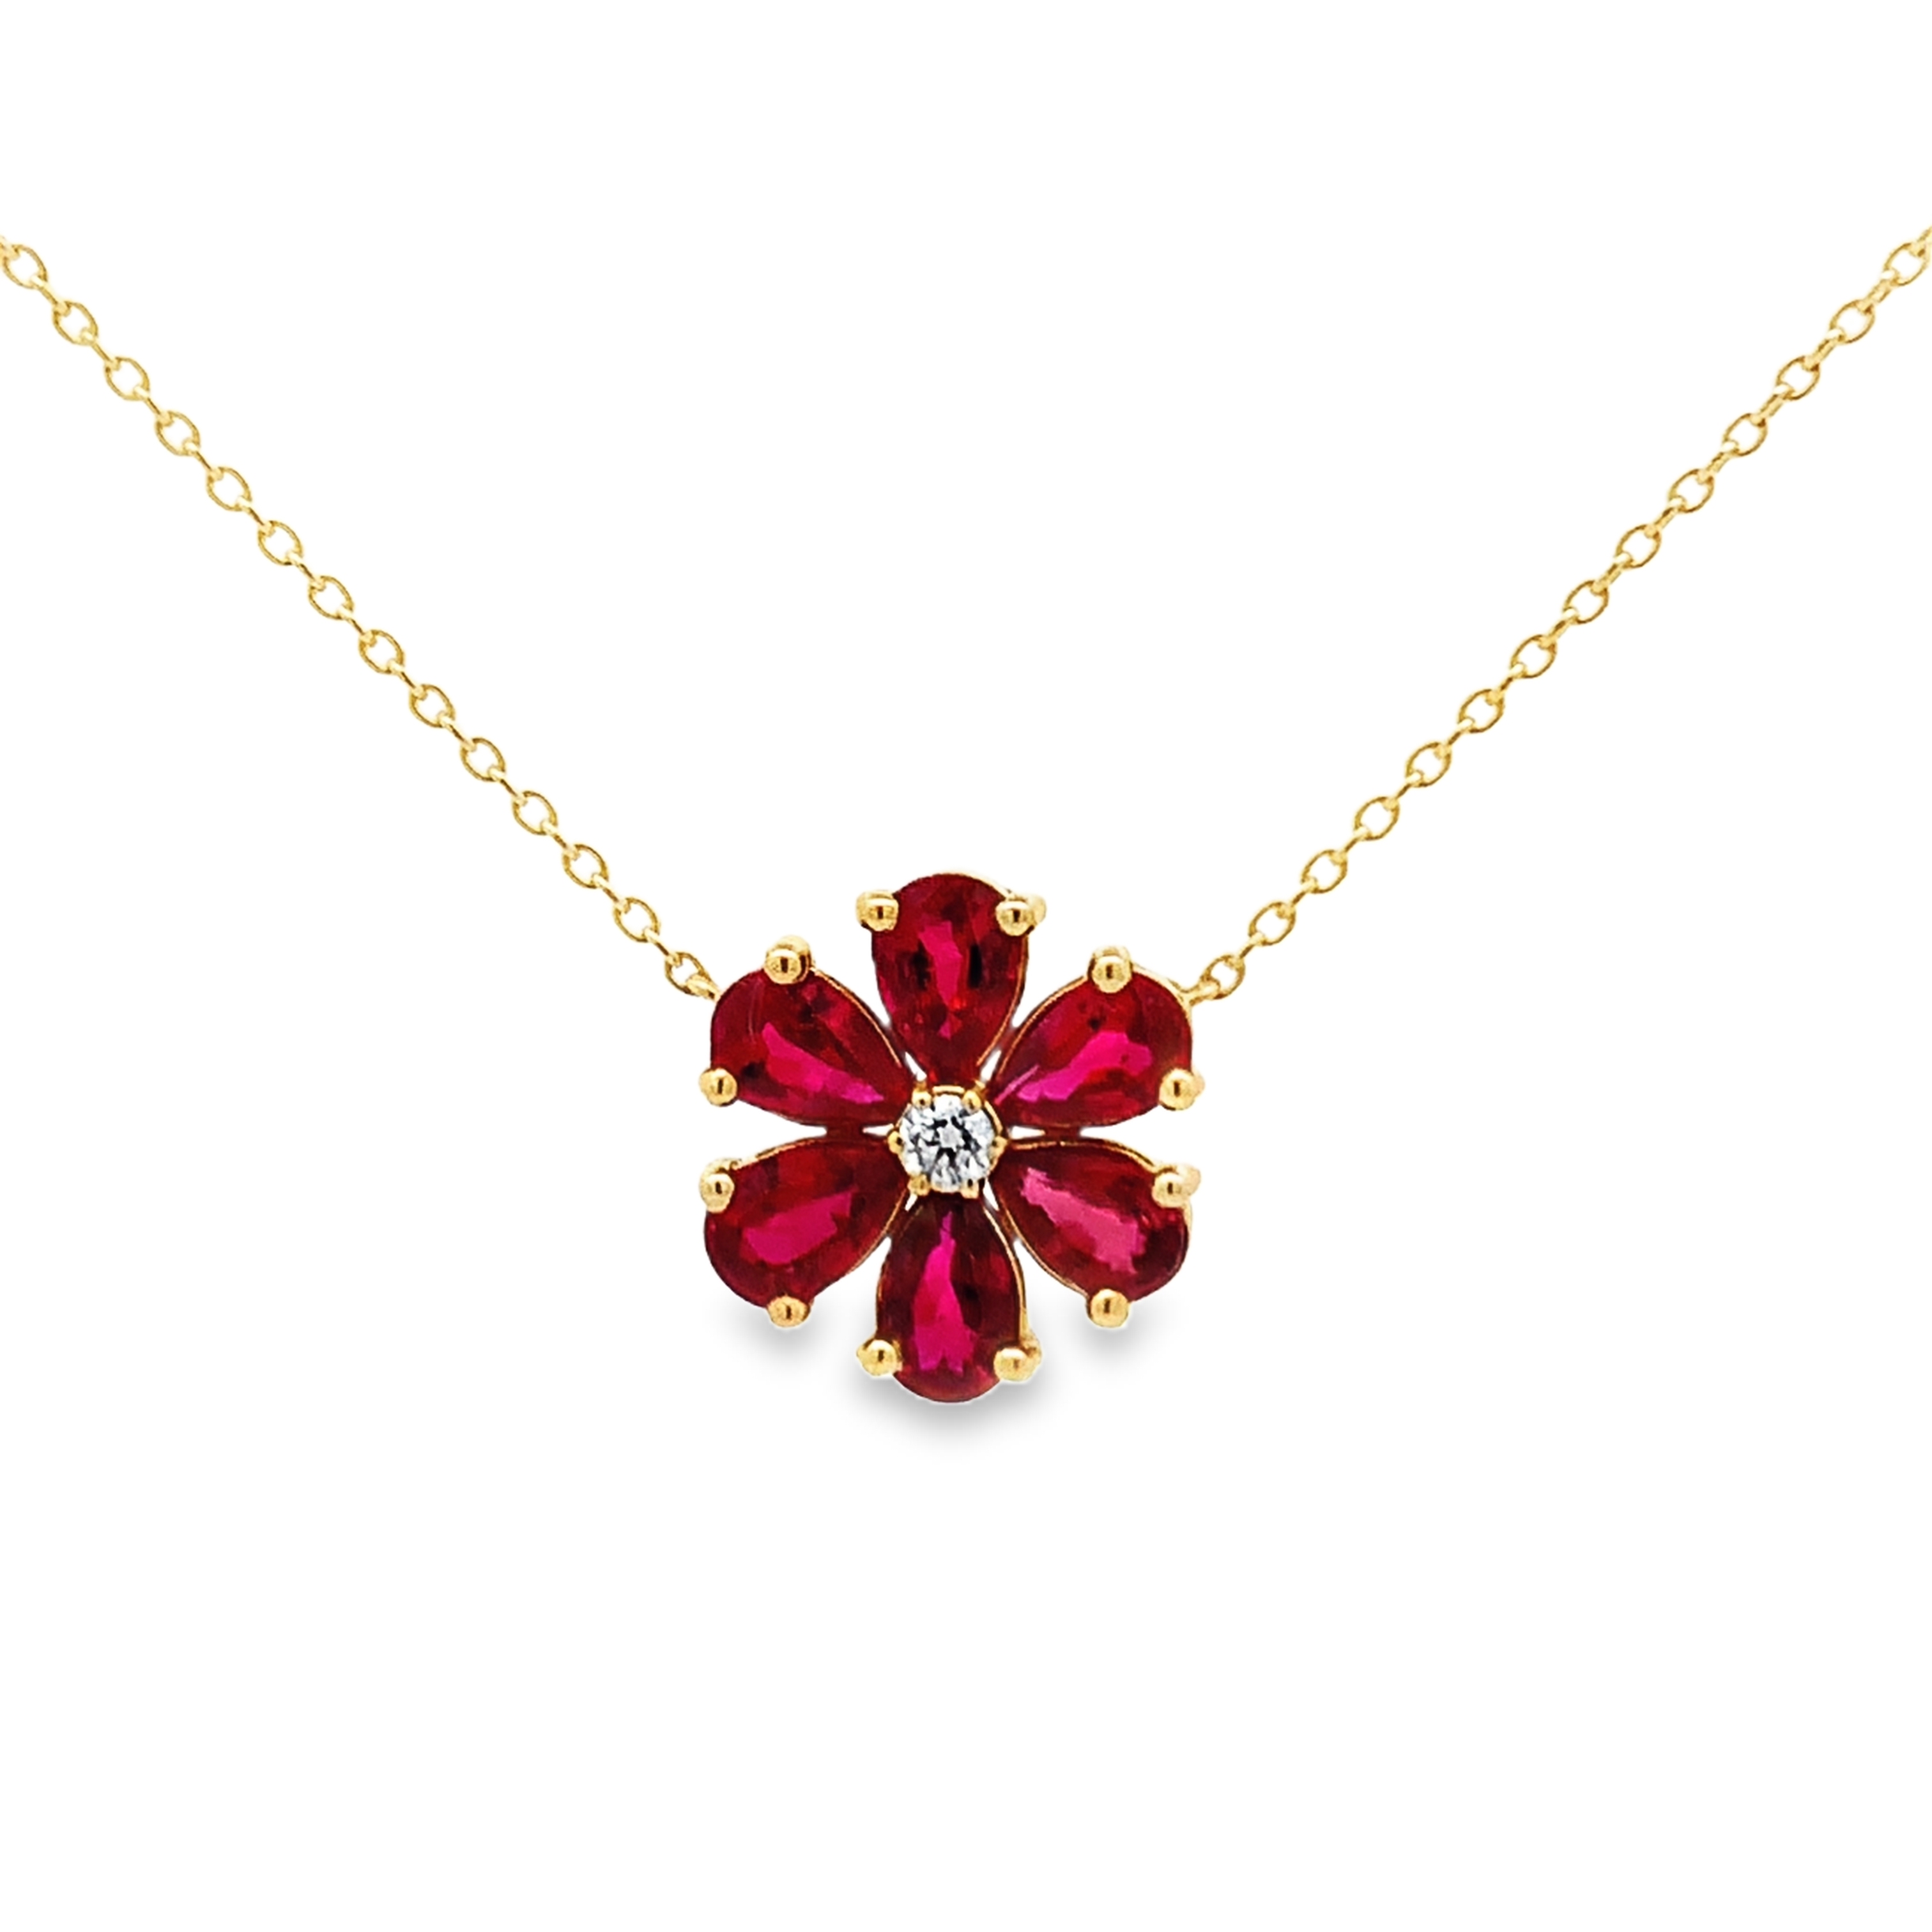 Norman Silverman 18K Yellow Gold Ruby Flower Necklace